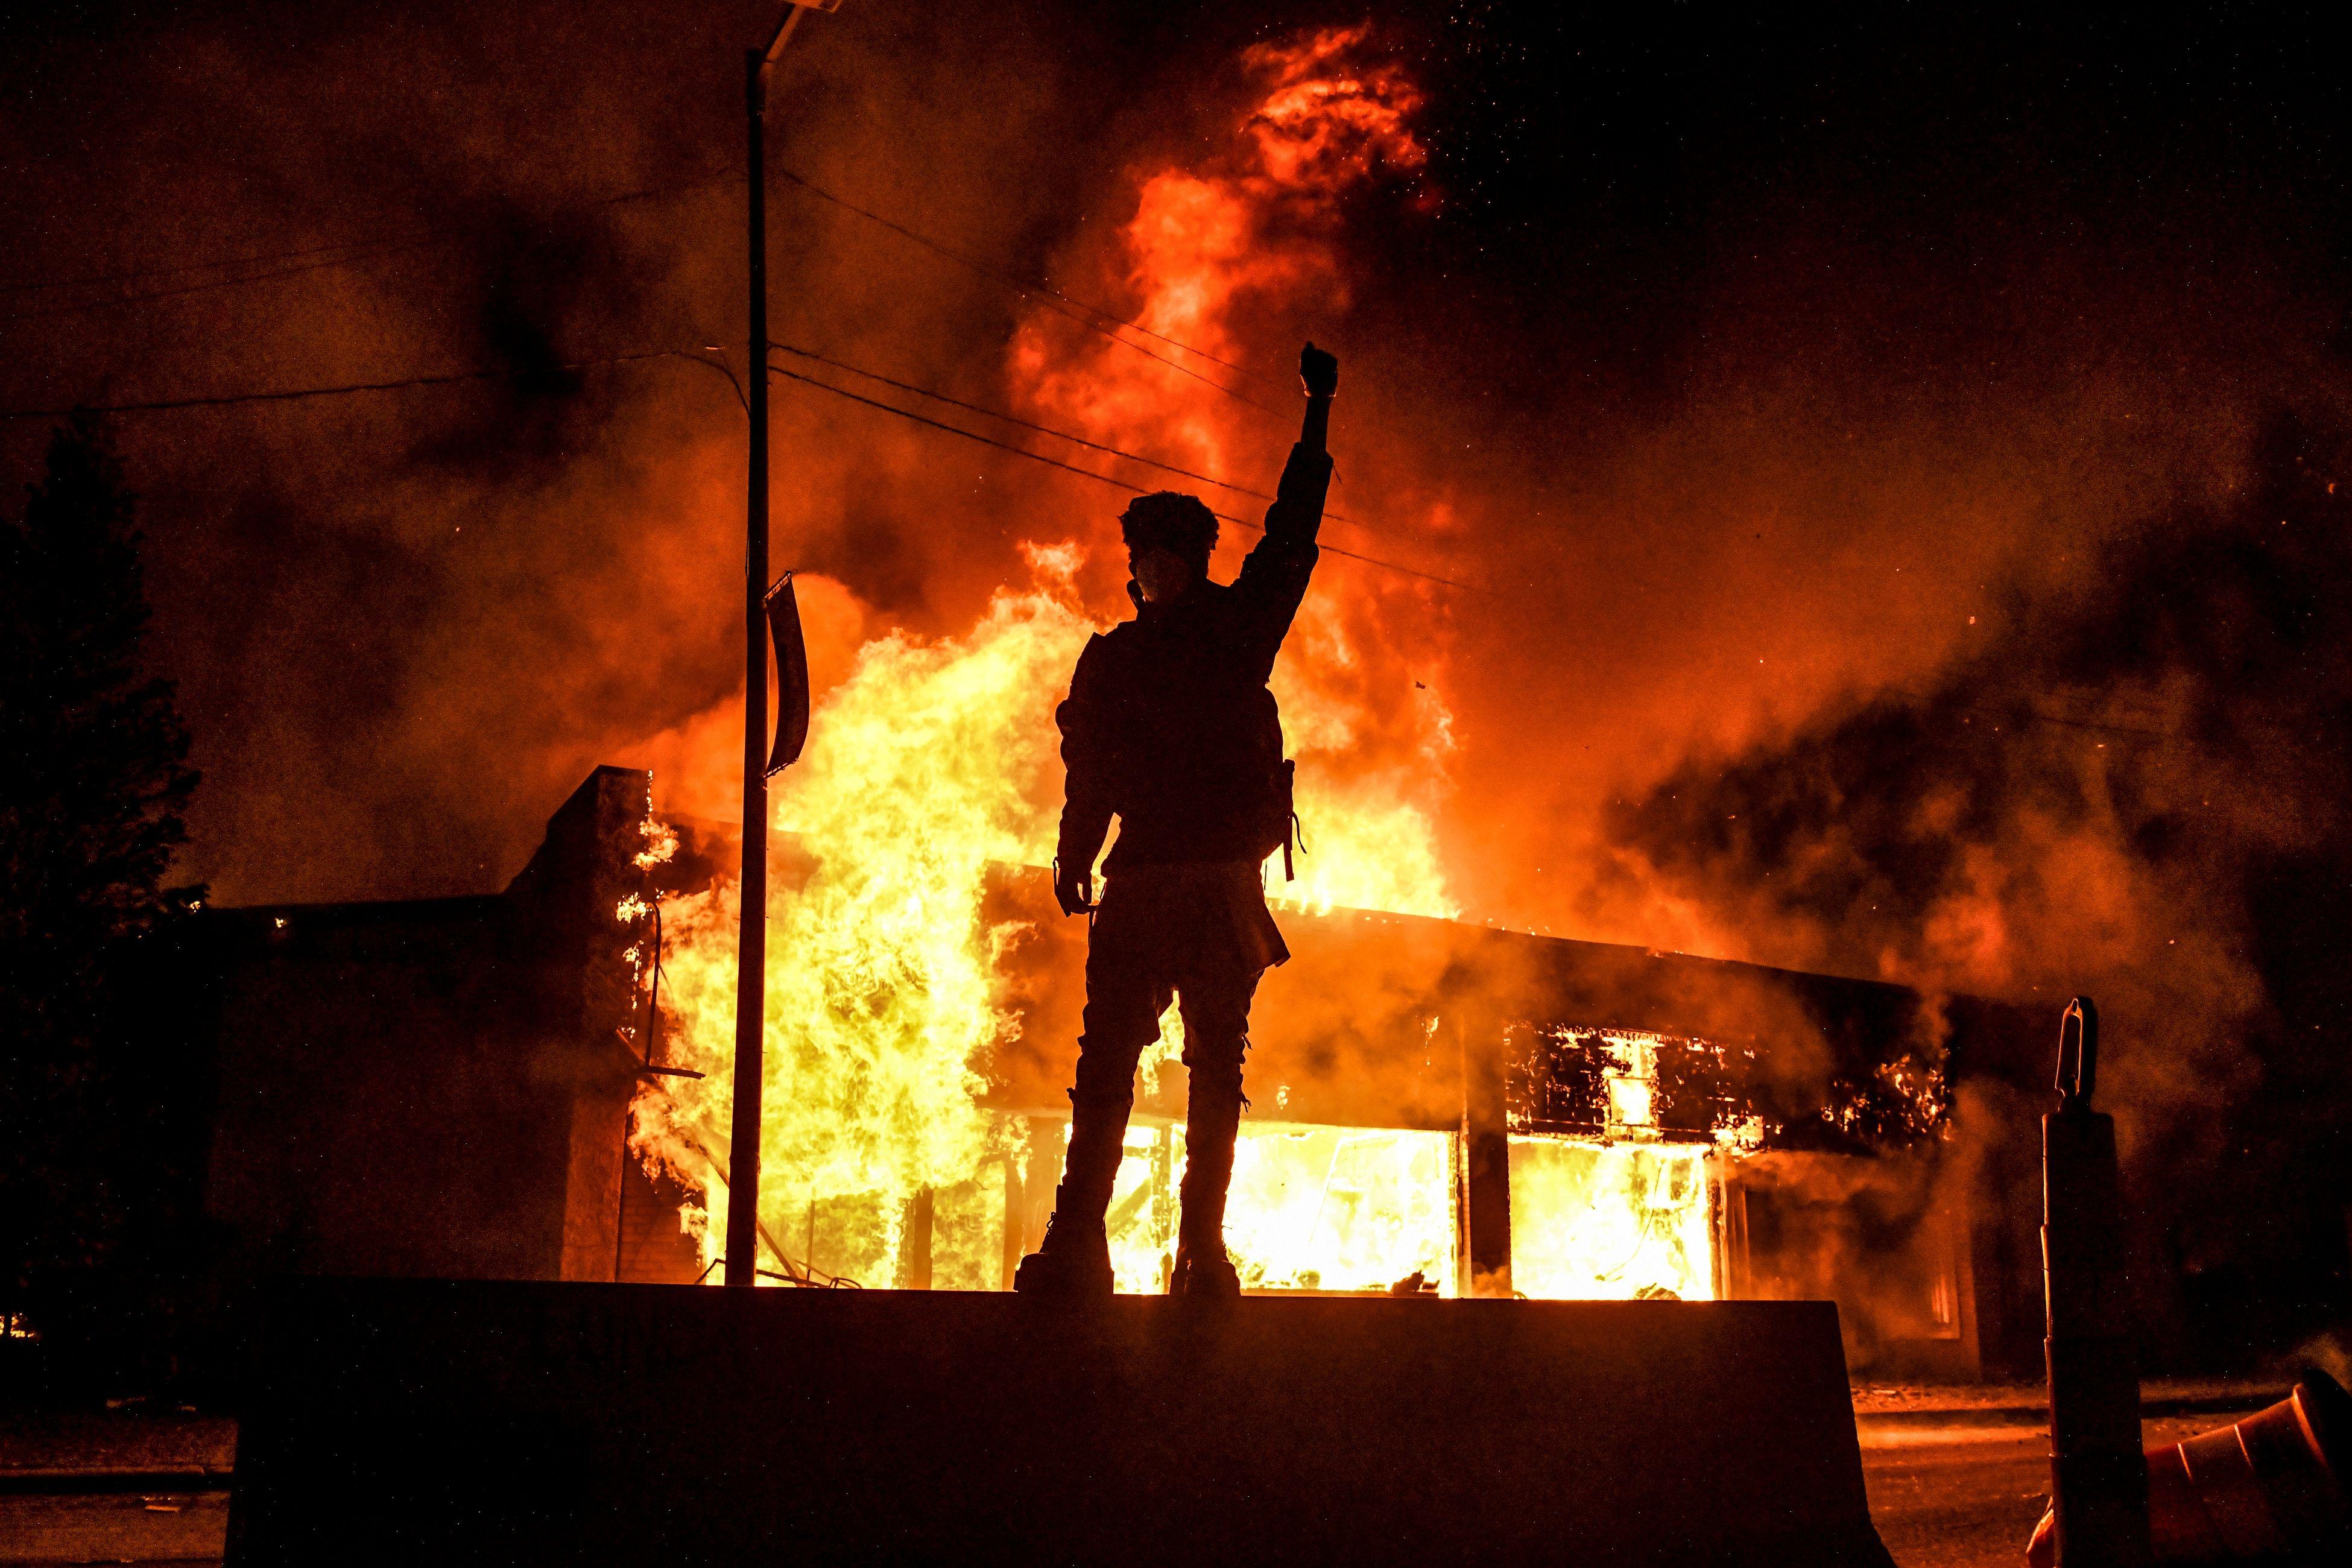 A protester reacts standing in front of a burning building set on fire during a demonstration in Minneapolis, Minnesota, on May 29, 2020.